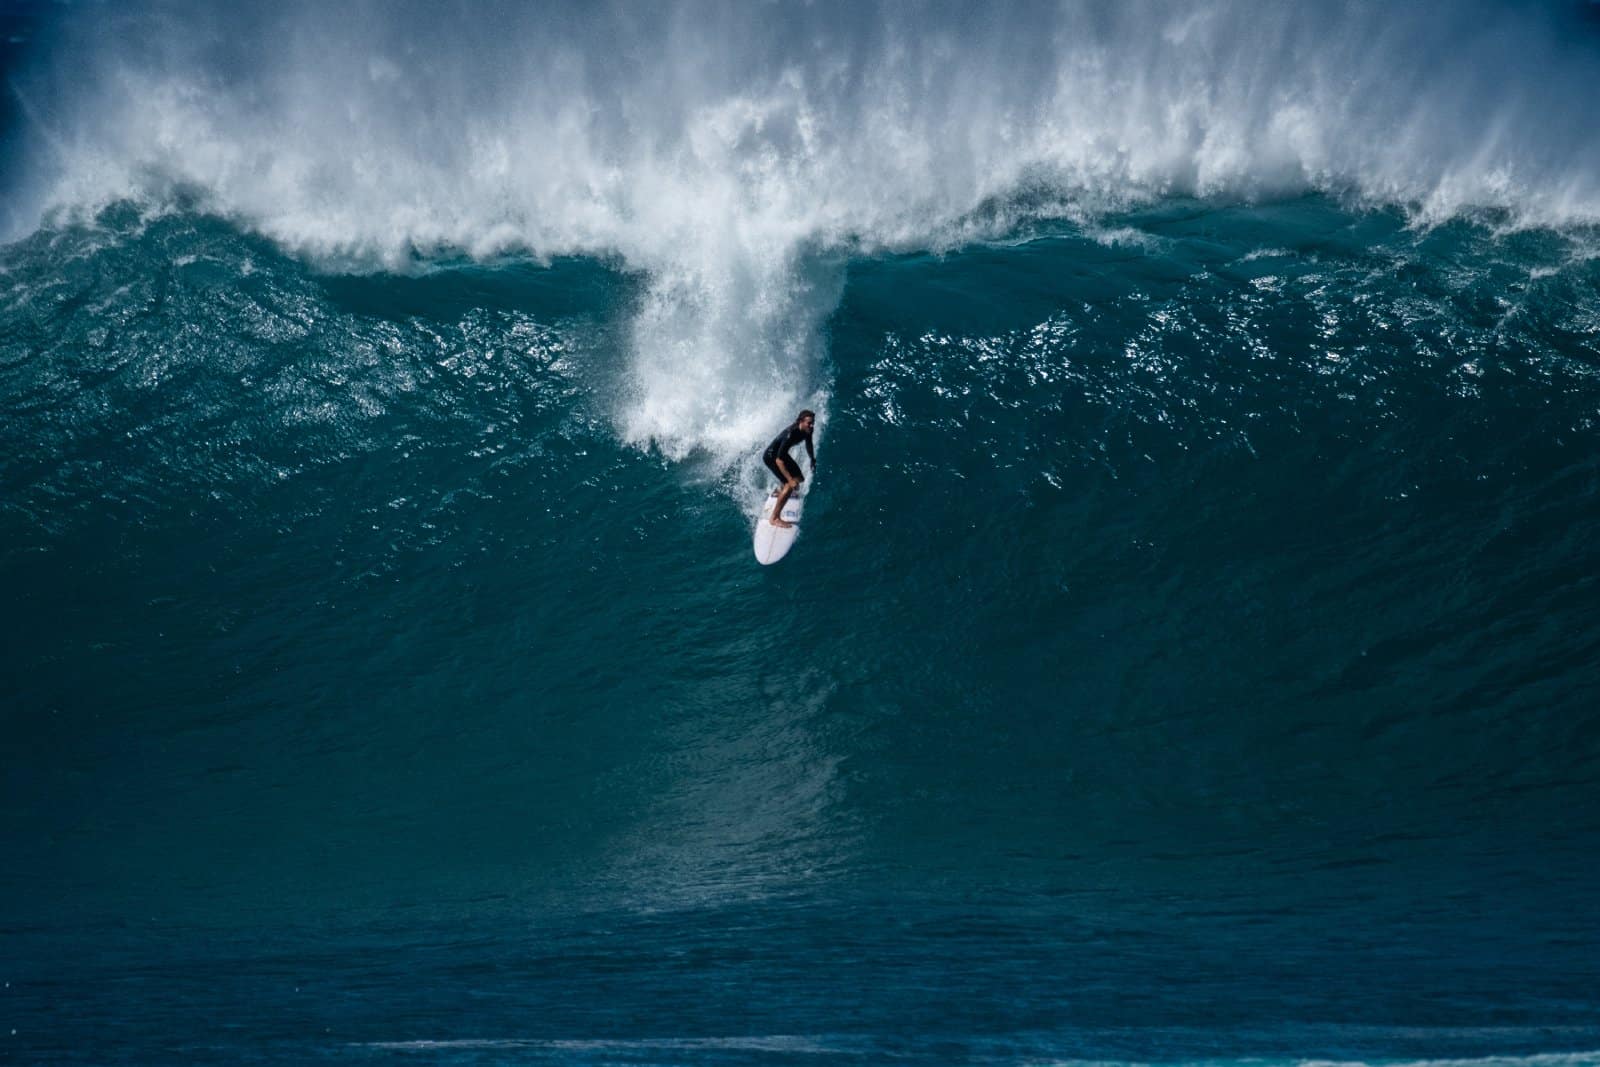 <p class="wp-caption-text">Image Credit: Shutterstock / Dudarev Mikhail</p>  <p>Welcome to the ultimate proving ground for barrel hunters—the Banzai Pipeline. Located on Oahu’s North Shore, this iconic break serves up some of the most intense and adrenaline-pumping waves on Earth. But if you’re willing to take the drop, you’ll be rewarded with the ride of your life.</p>